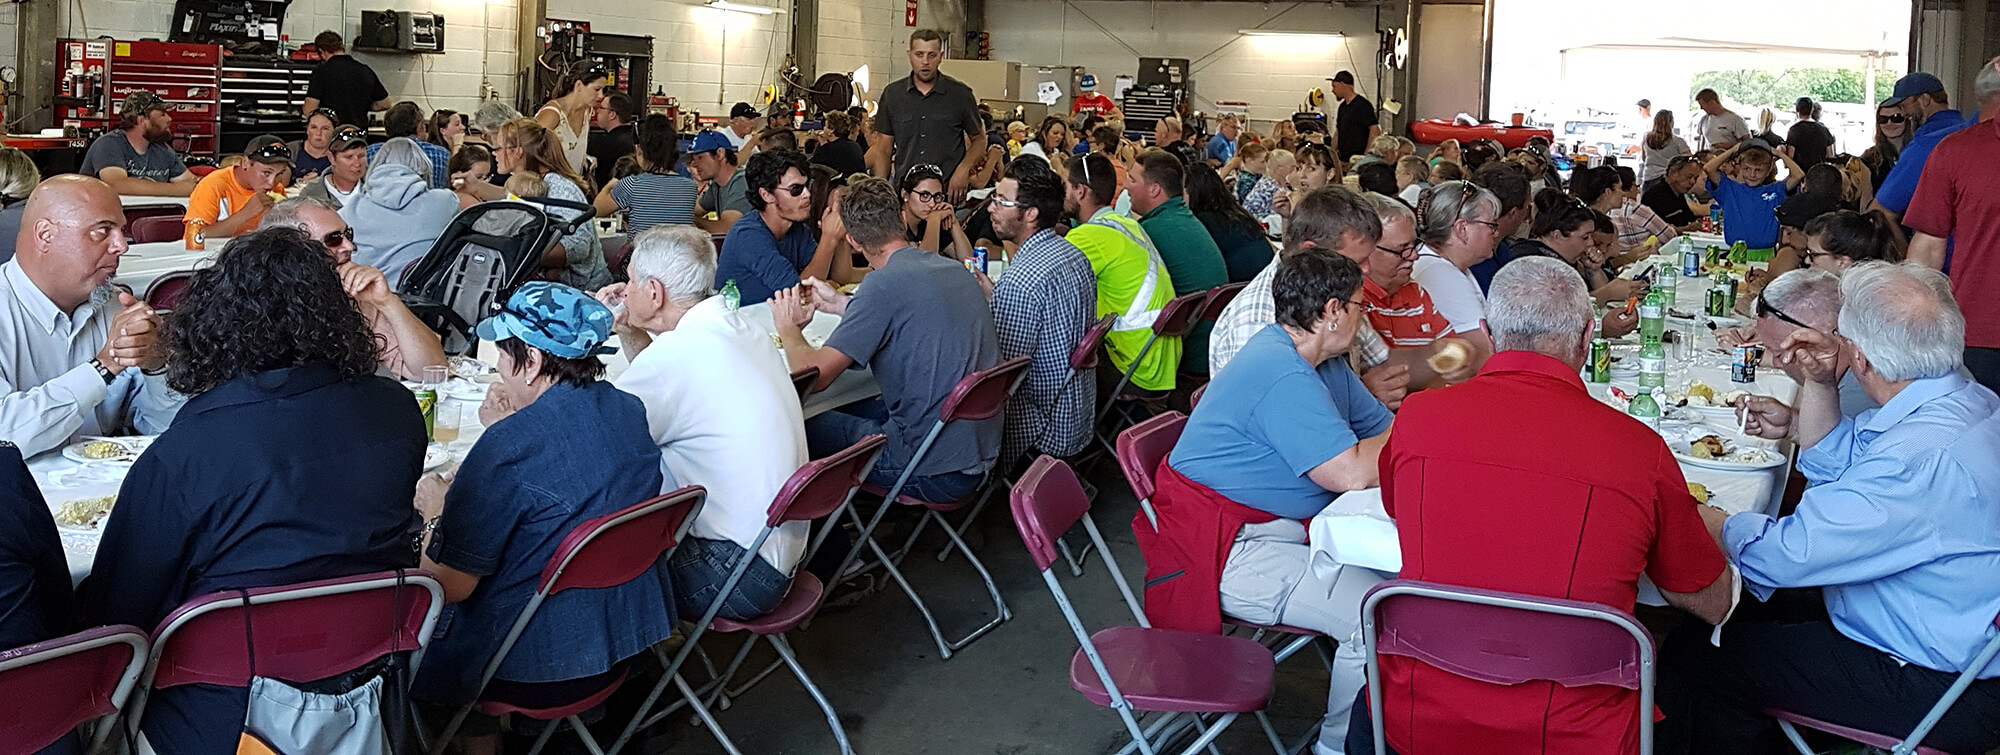 large barn with people at tables eating dinner